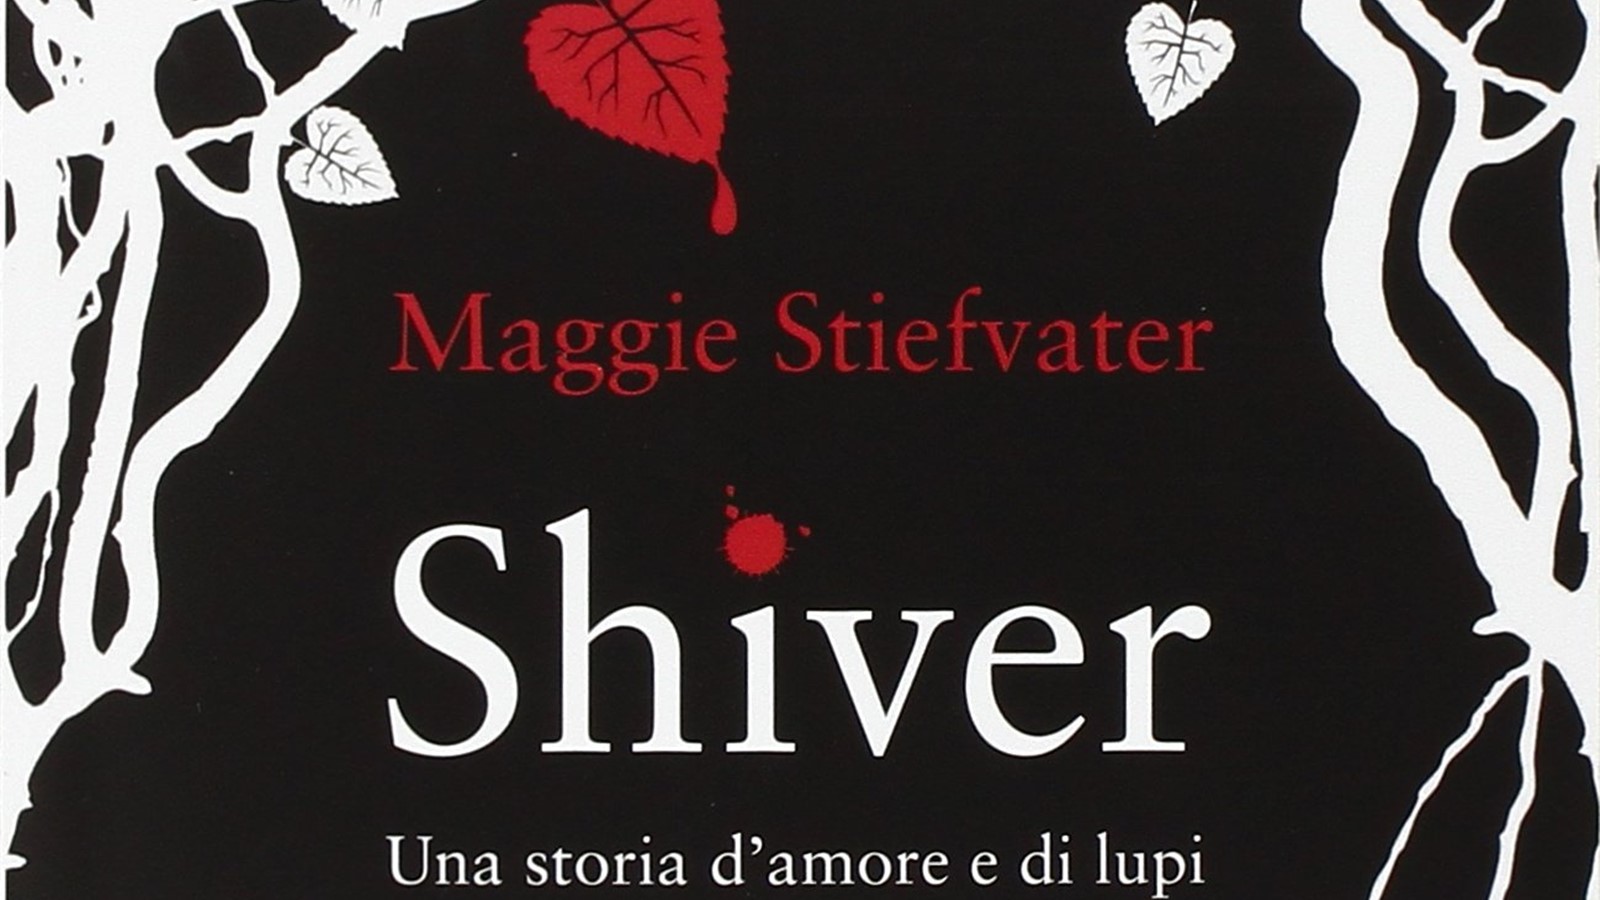 Shiver: Maggie Stiefvater's novel to be directed by Andy Fickman